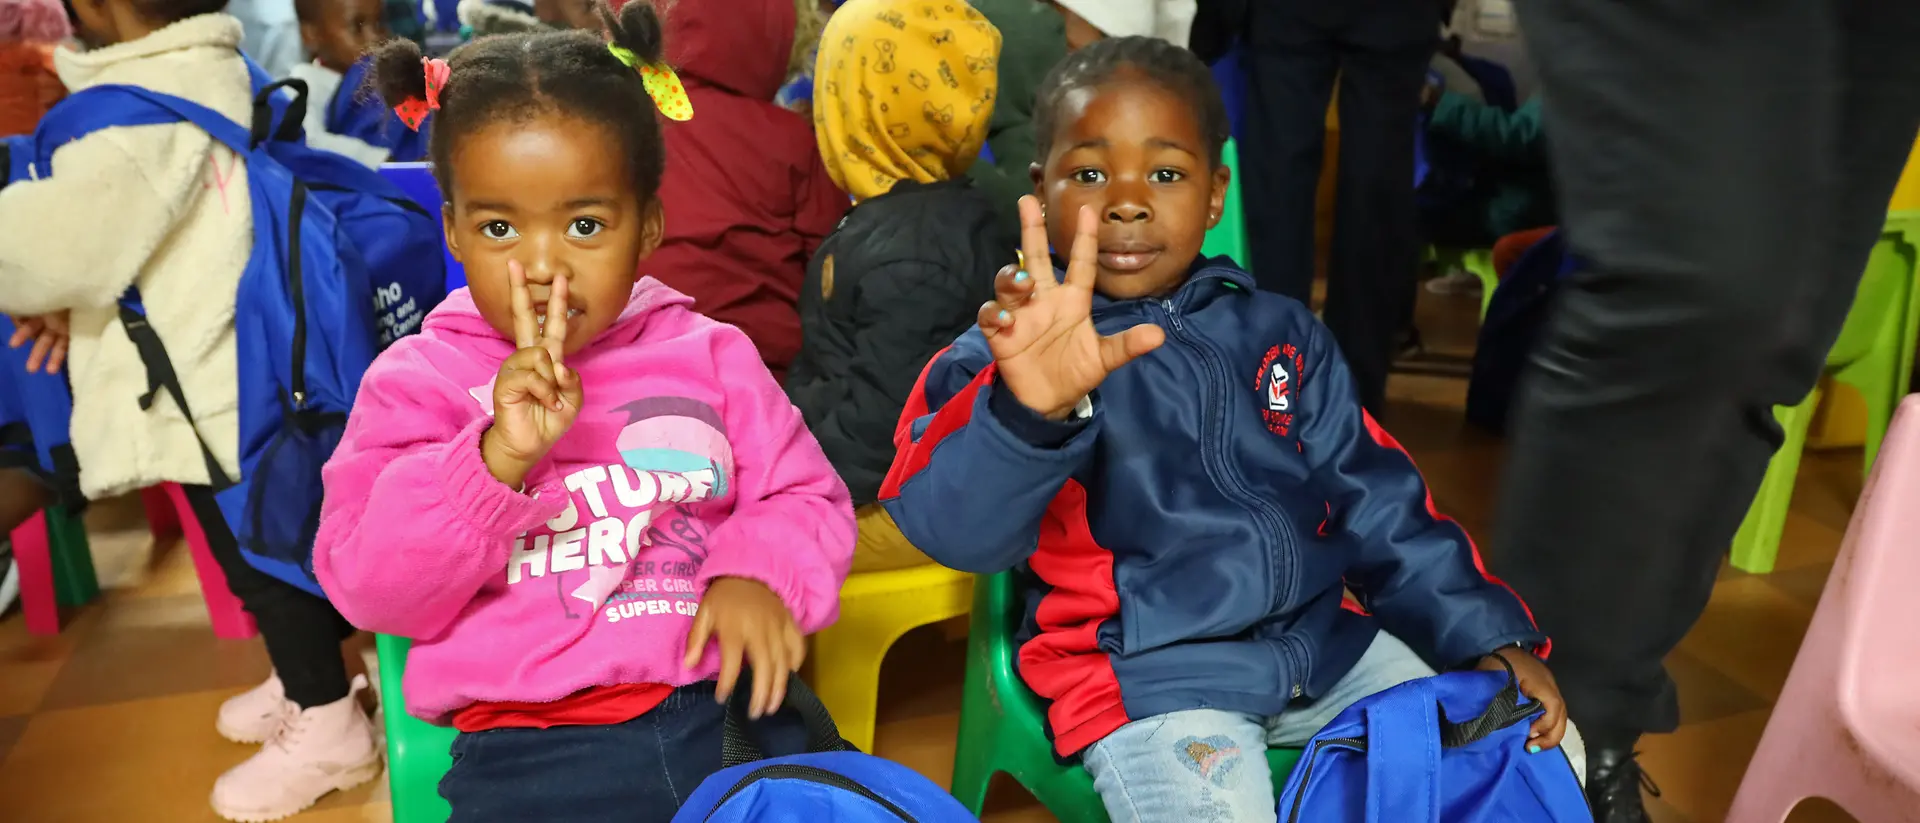 Two young children sit next to each other and hold up their hands.